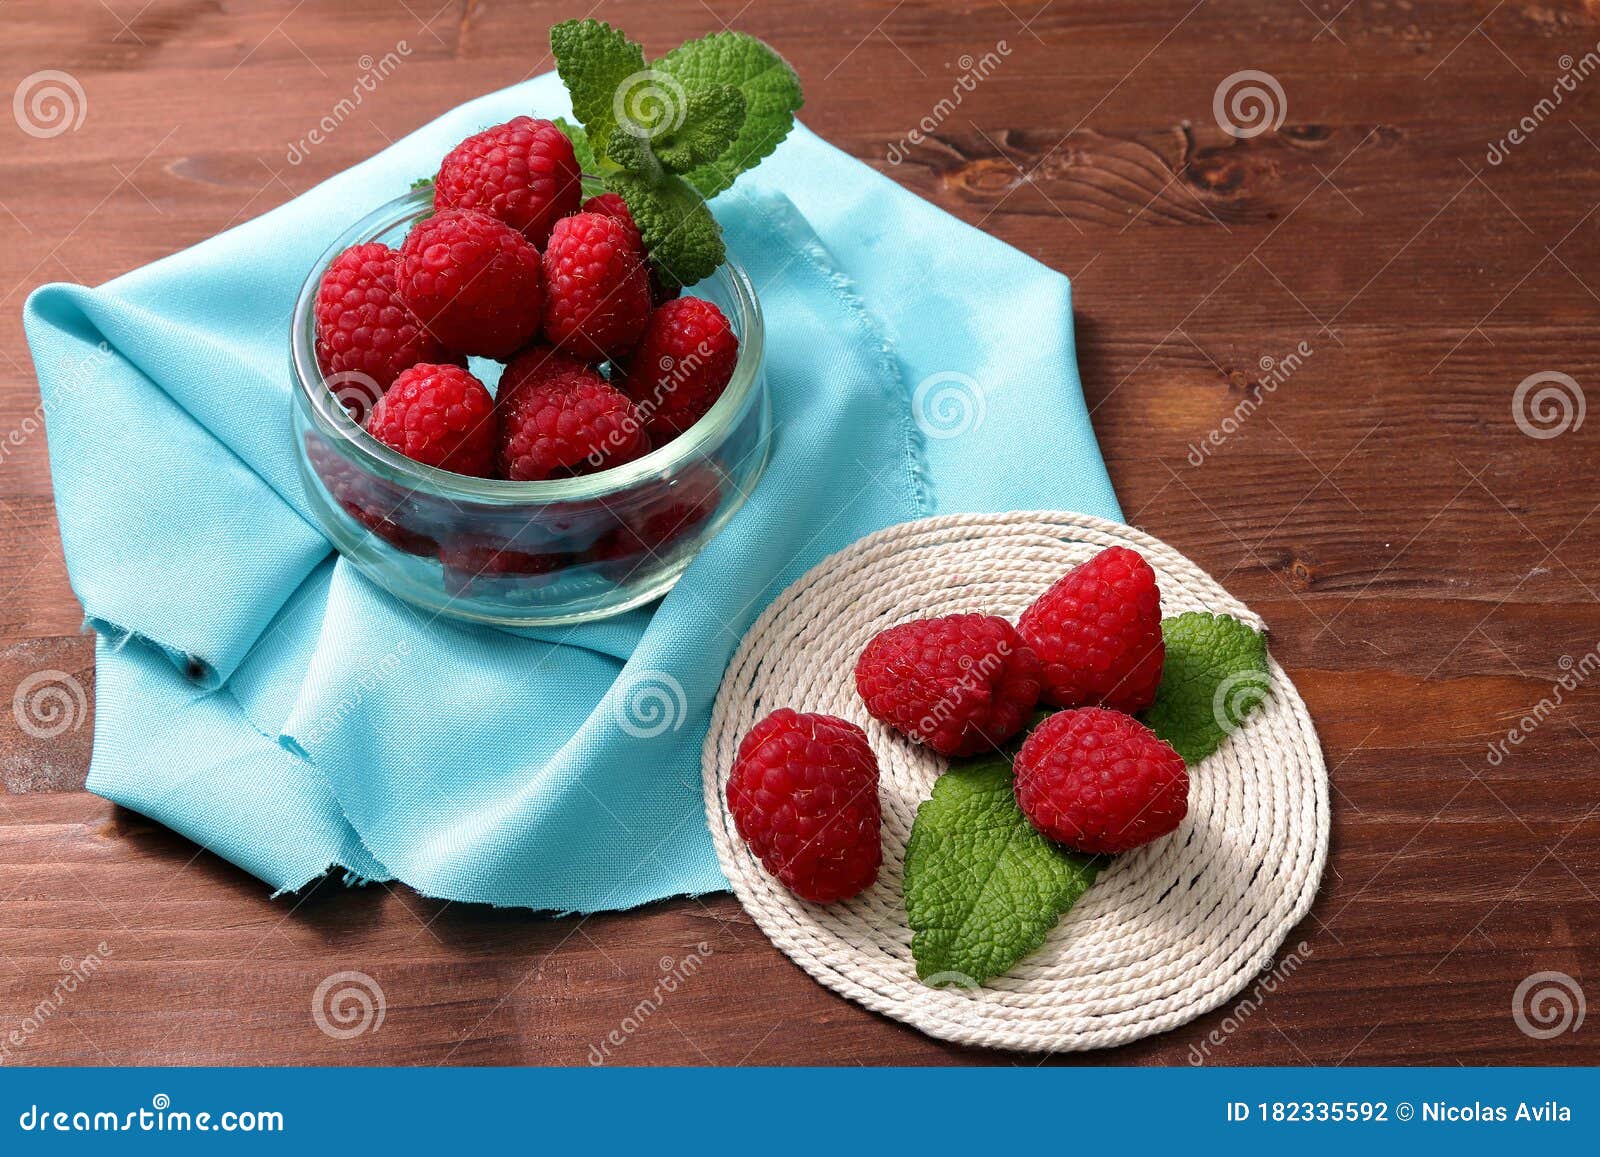 raspberries in a glass container and on a string circle